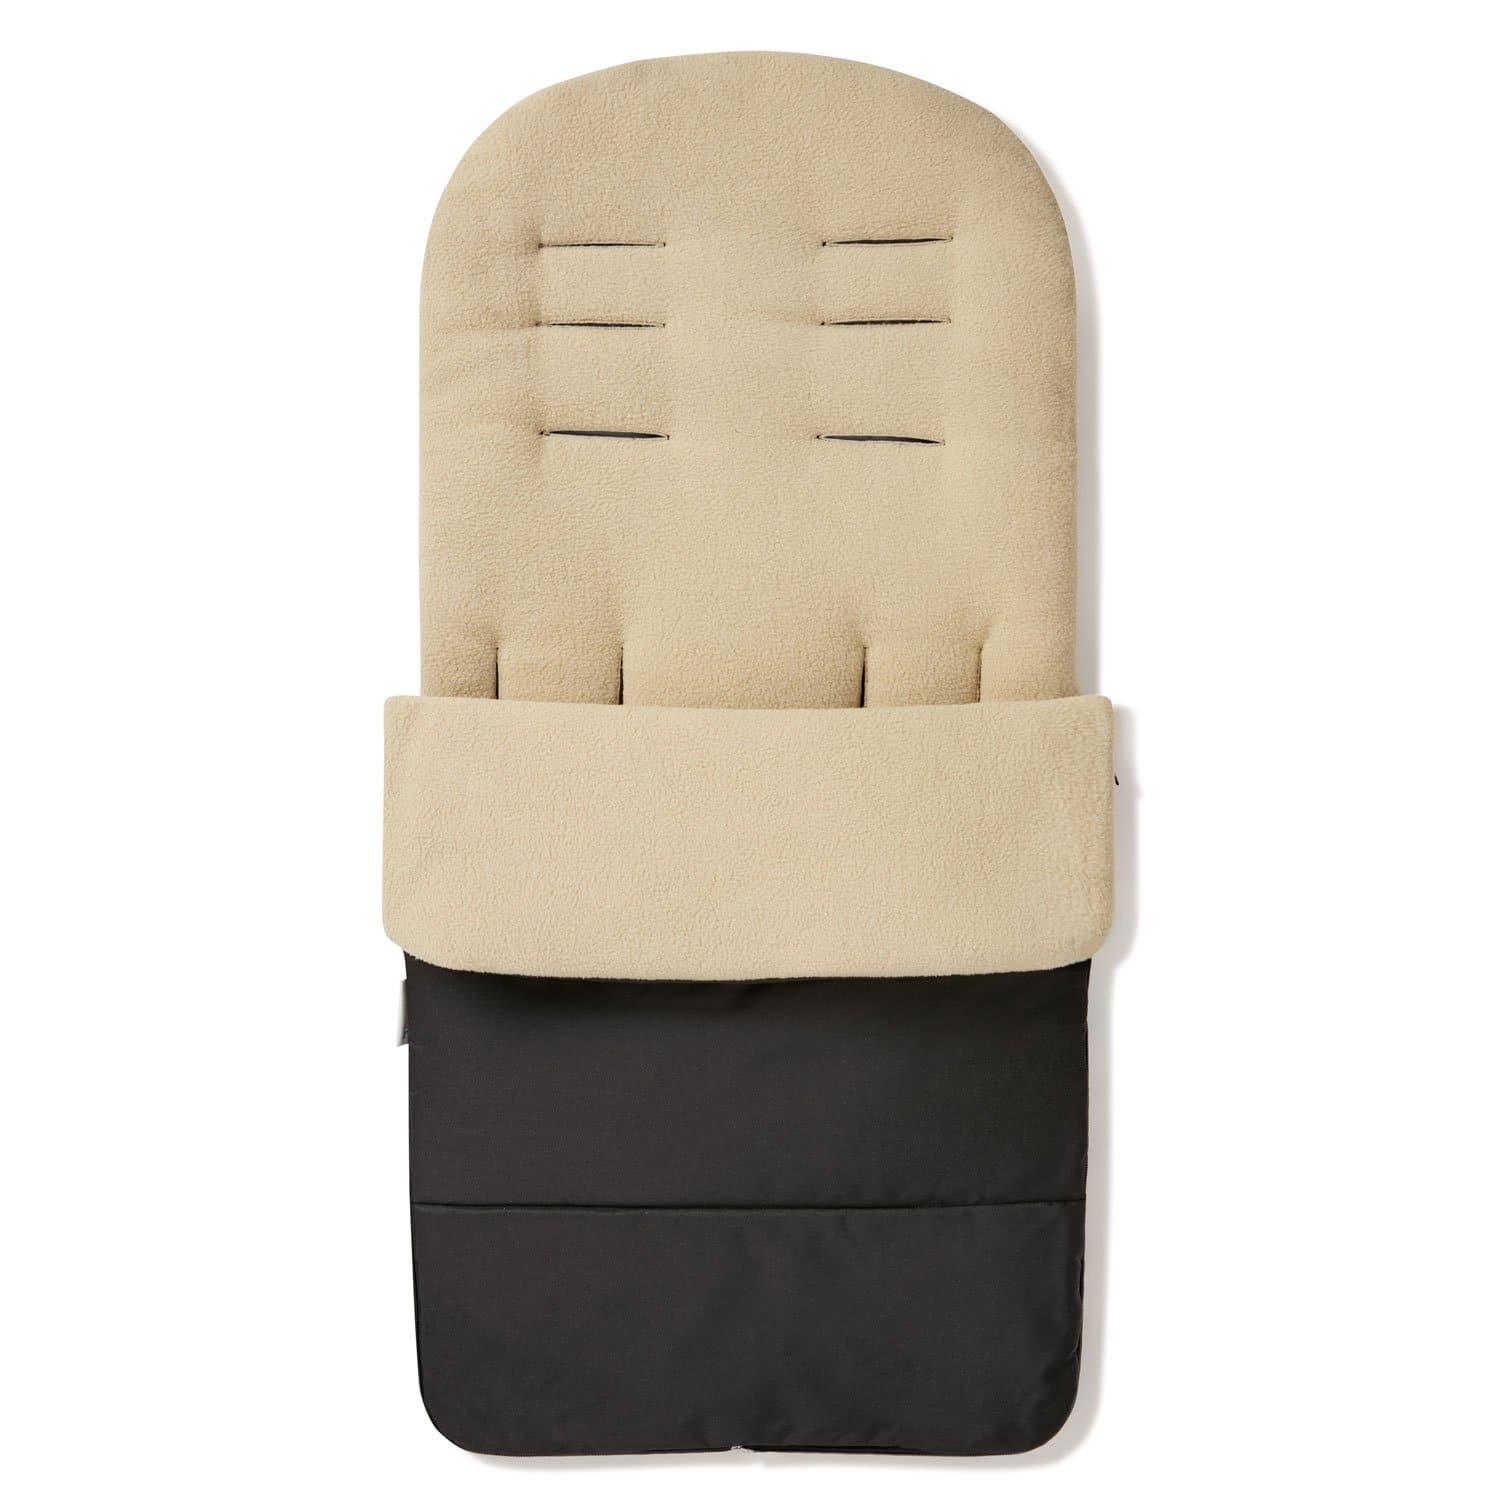 Premium Footmuff / Cosy Toes Compatible with Kinderkraft - Desert Sand / Fits All Models | For Your Little One